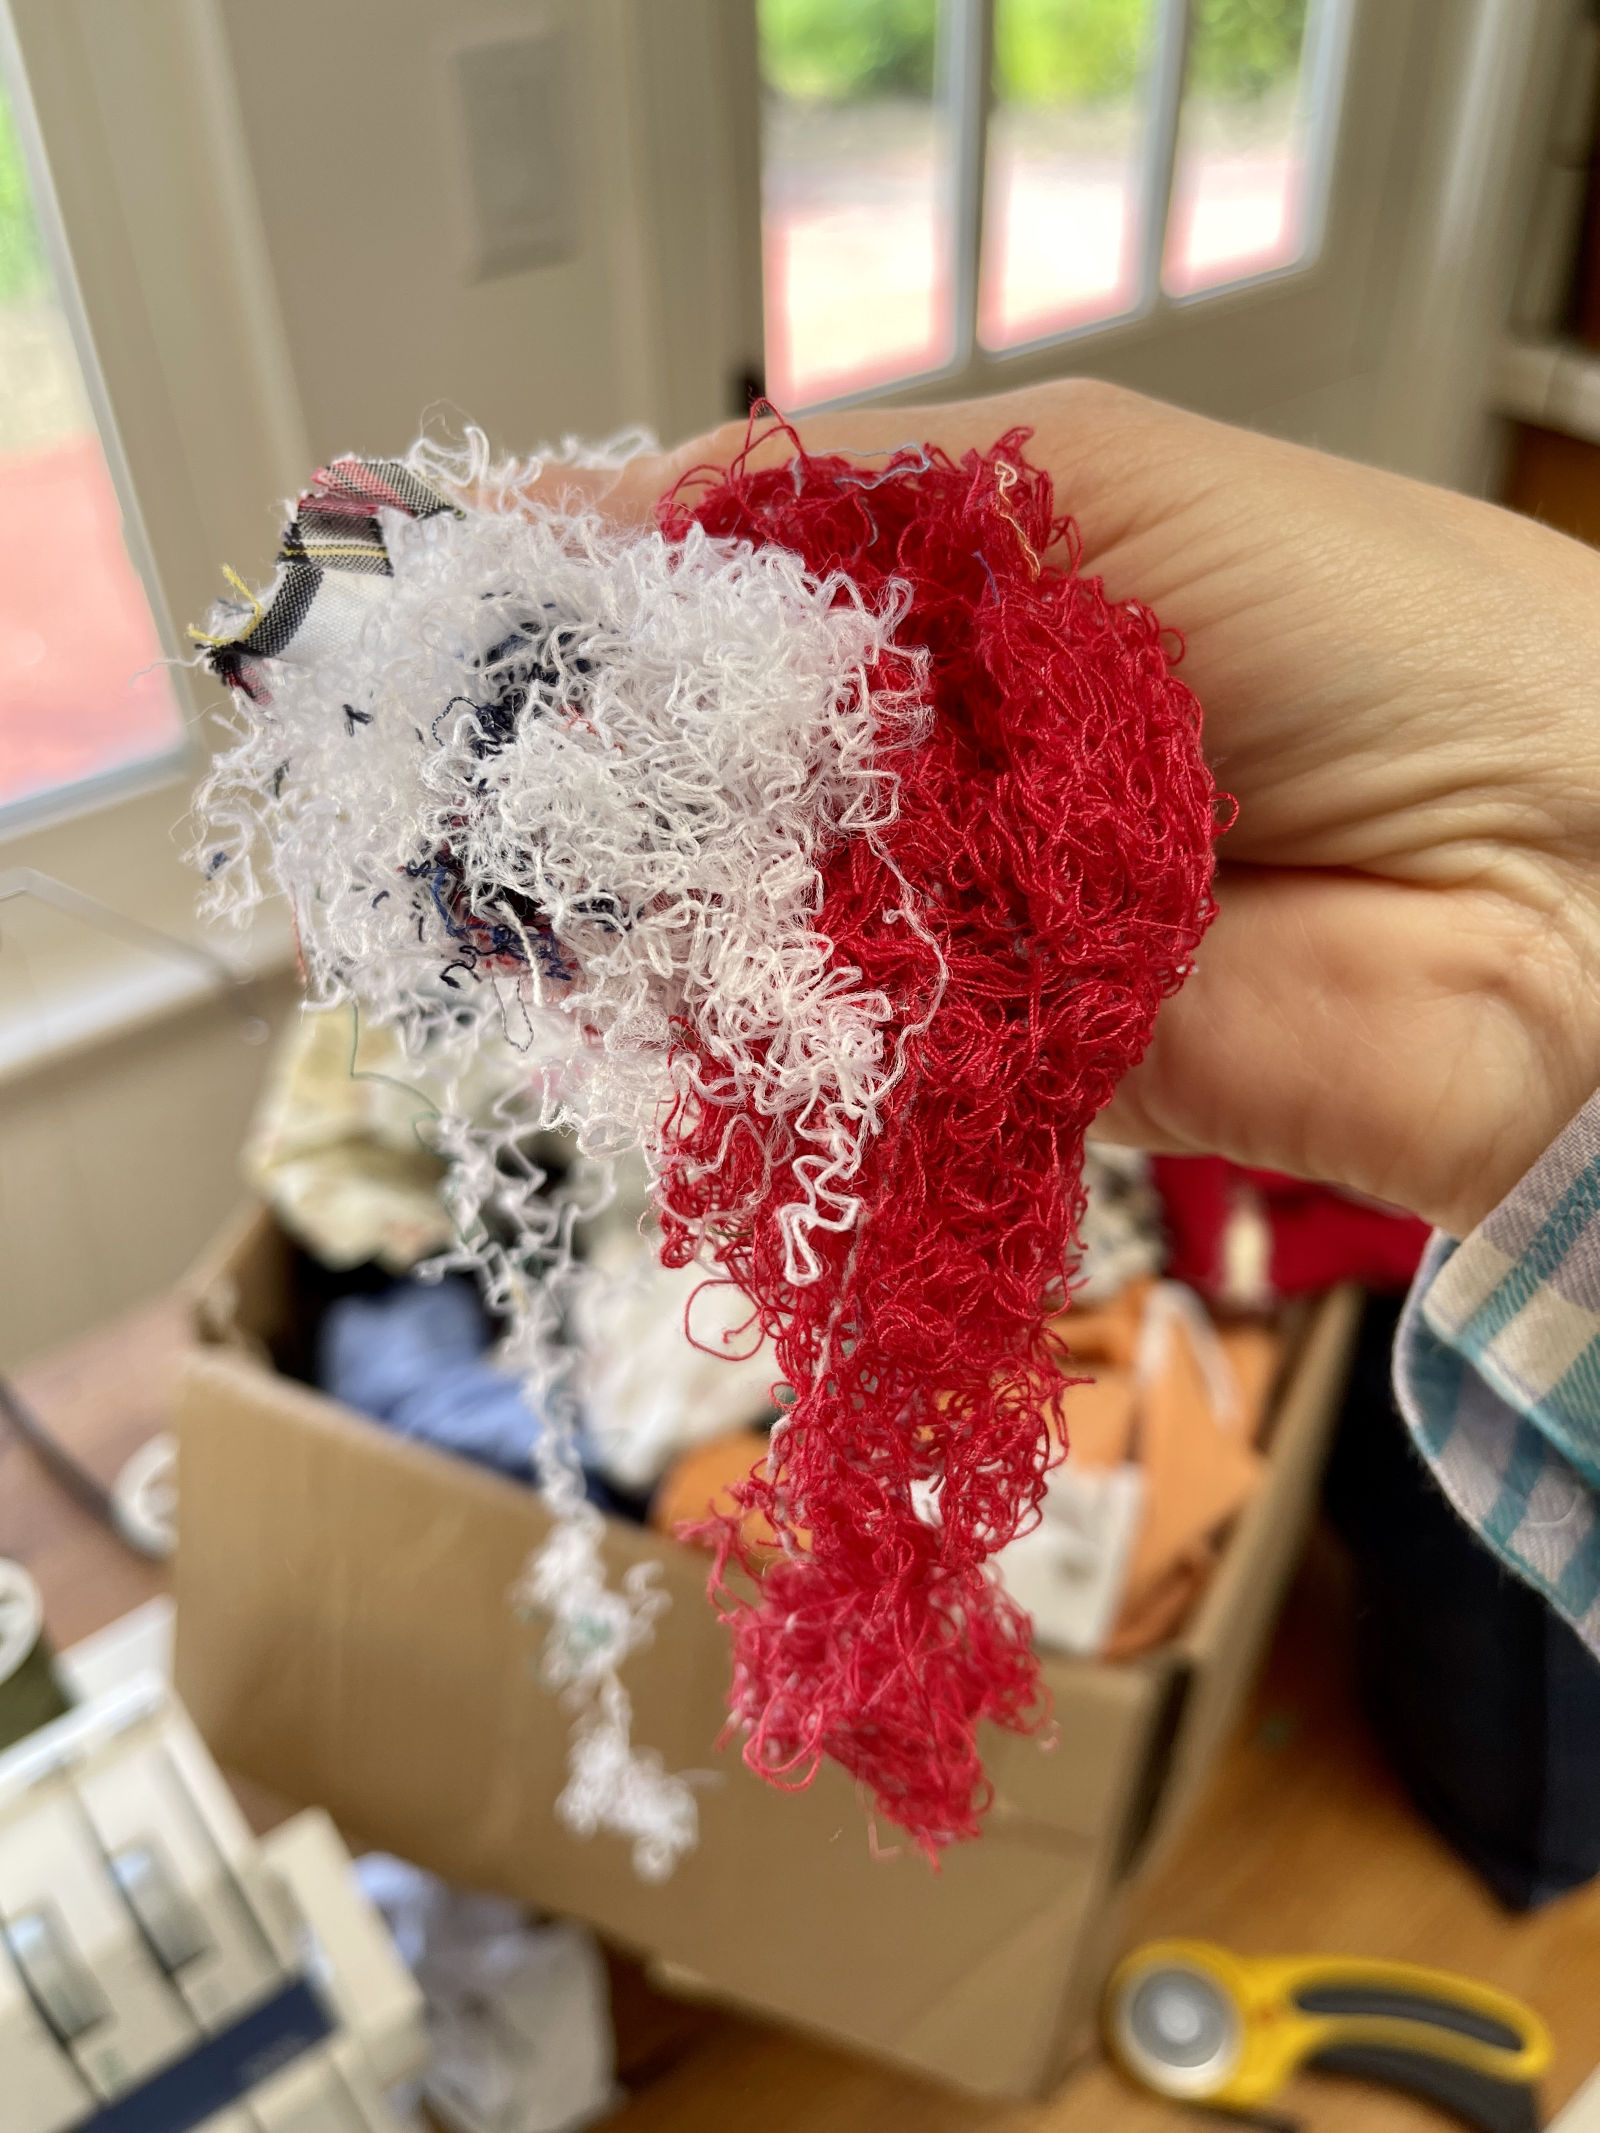 A handful of red and white threads for stuffing a denim garden kneeling pad